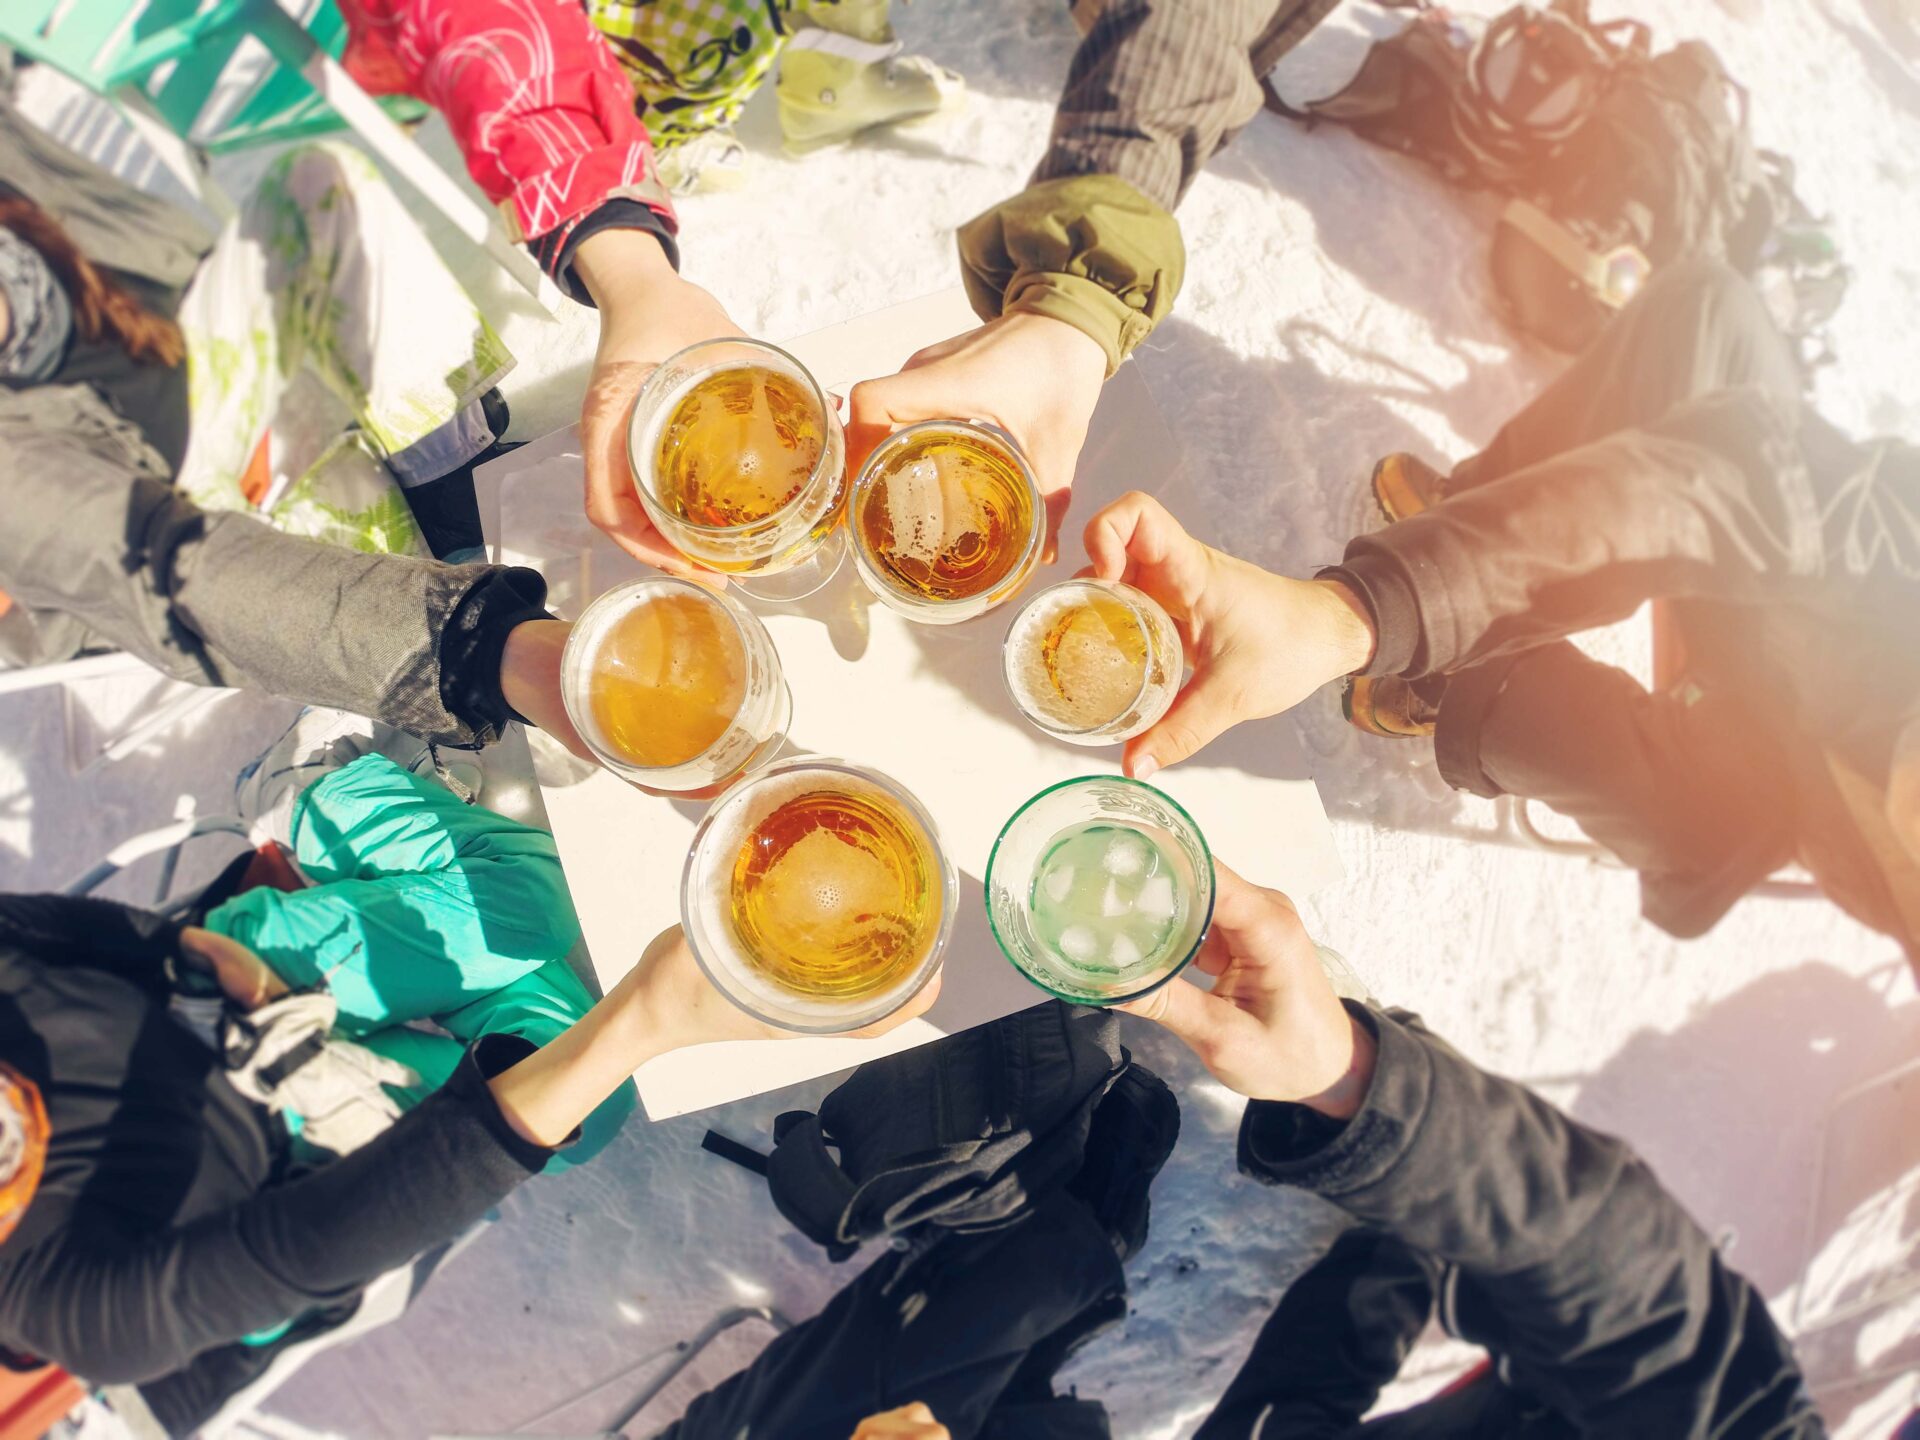 Above view of hands of five ski friends each holding a pint glass of beer in a circle on a table.